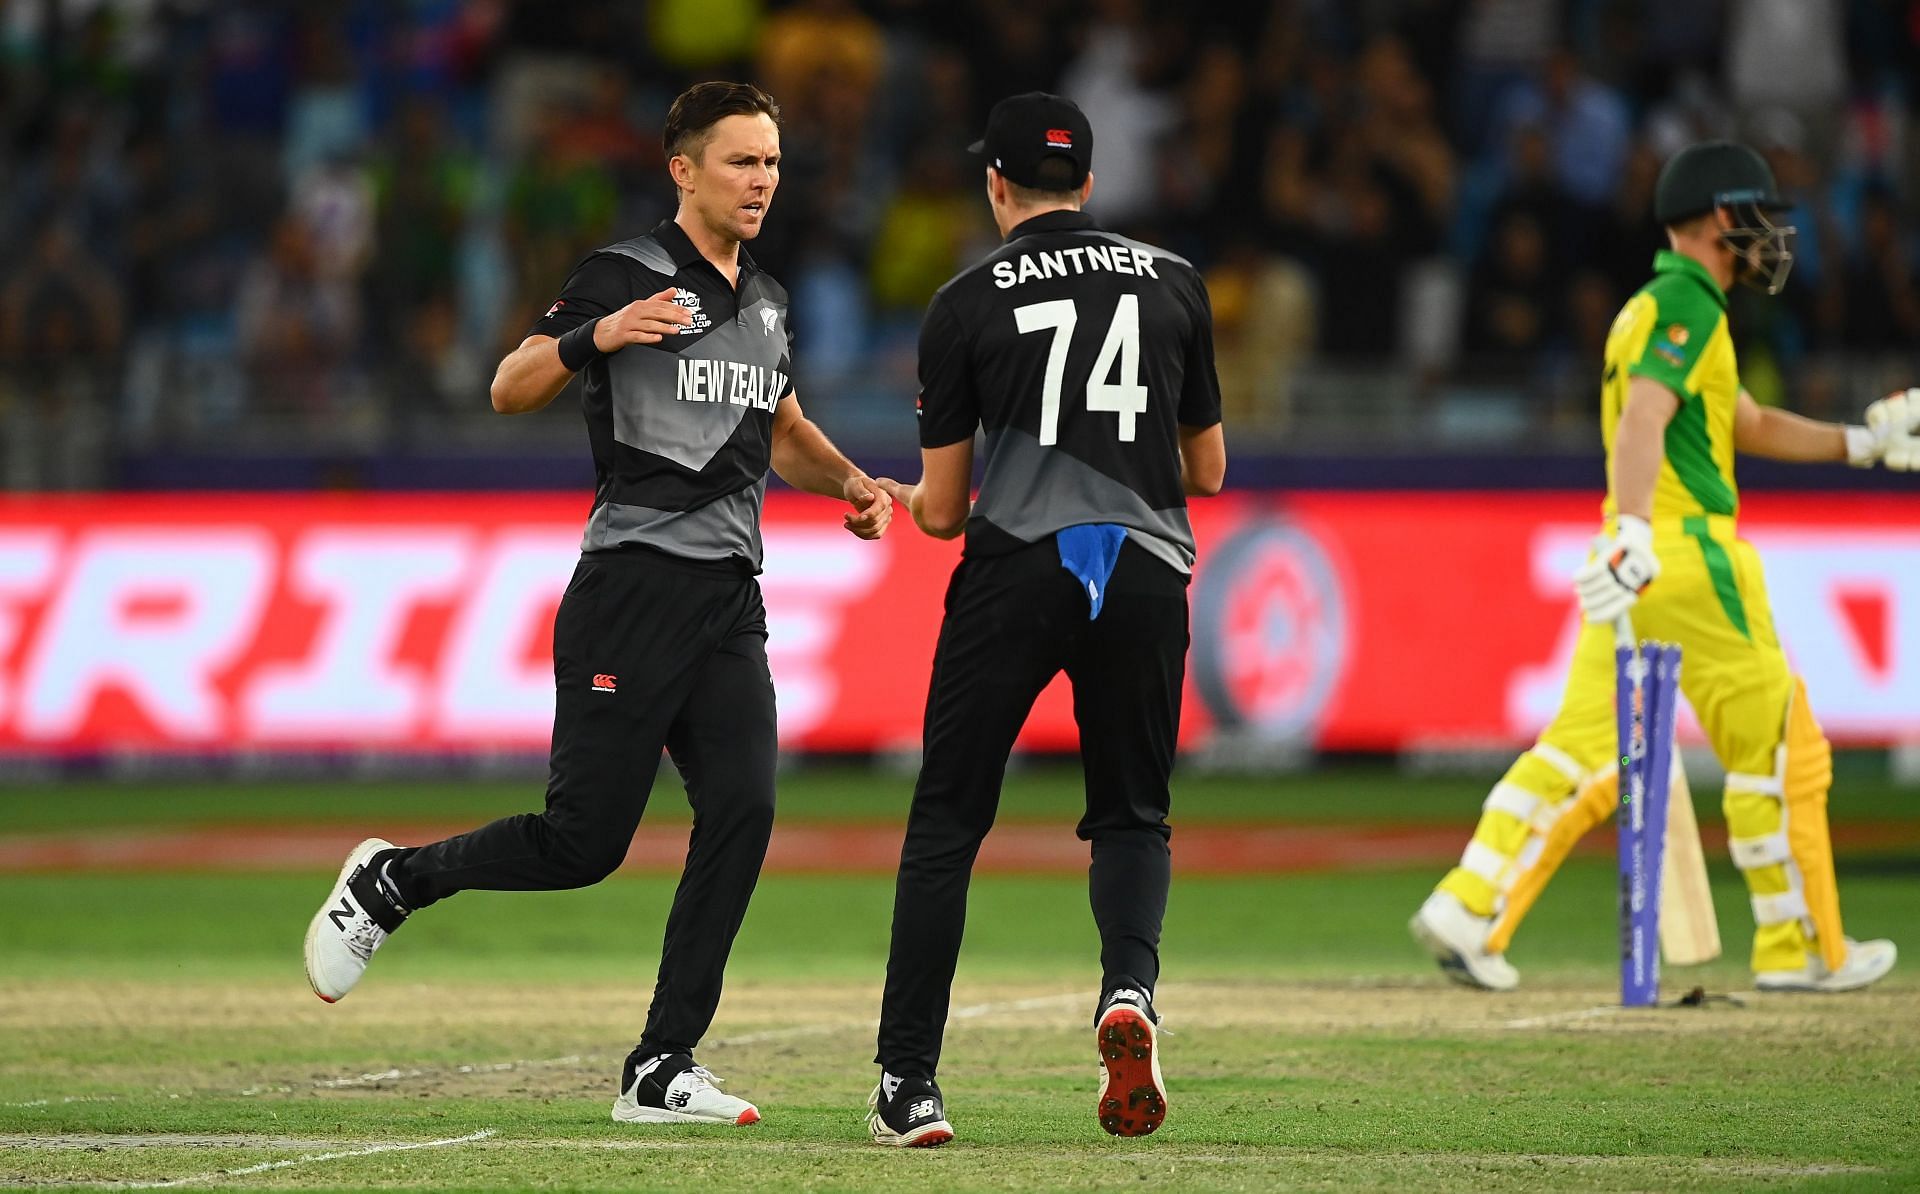 New Zealand fell to defeat against Australia in the finals of the T20 World Cup.